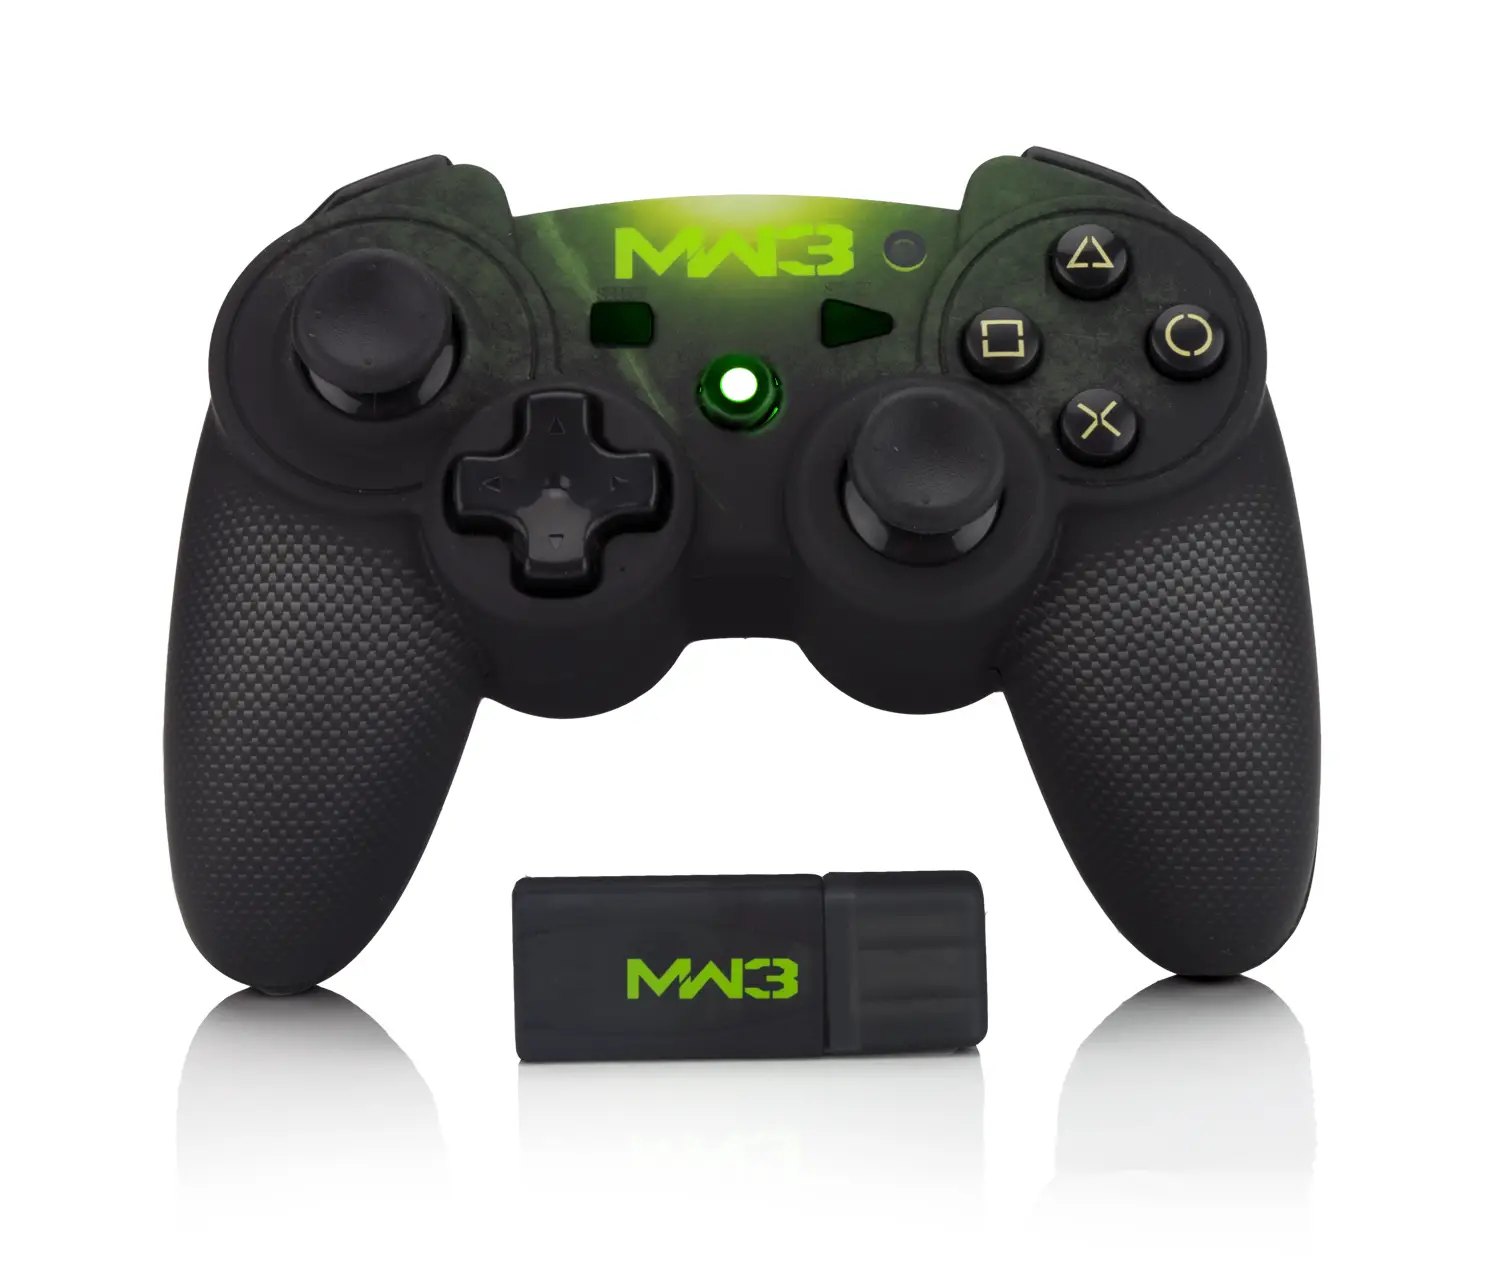 What Controllers Can You Use For Mw3 Wii